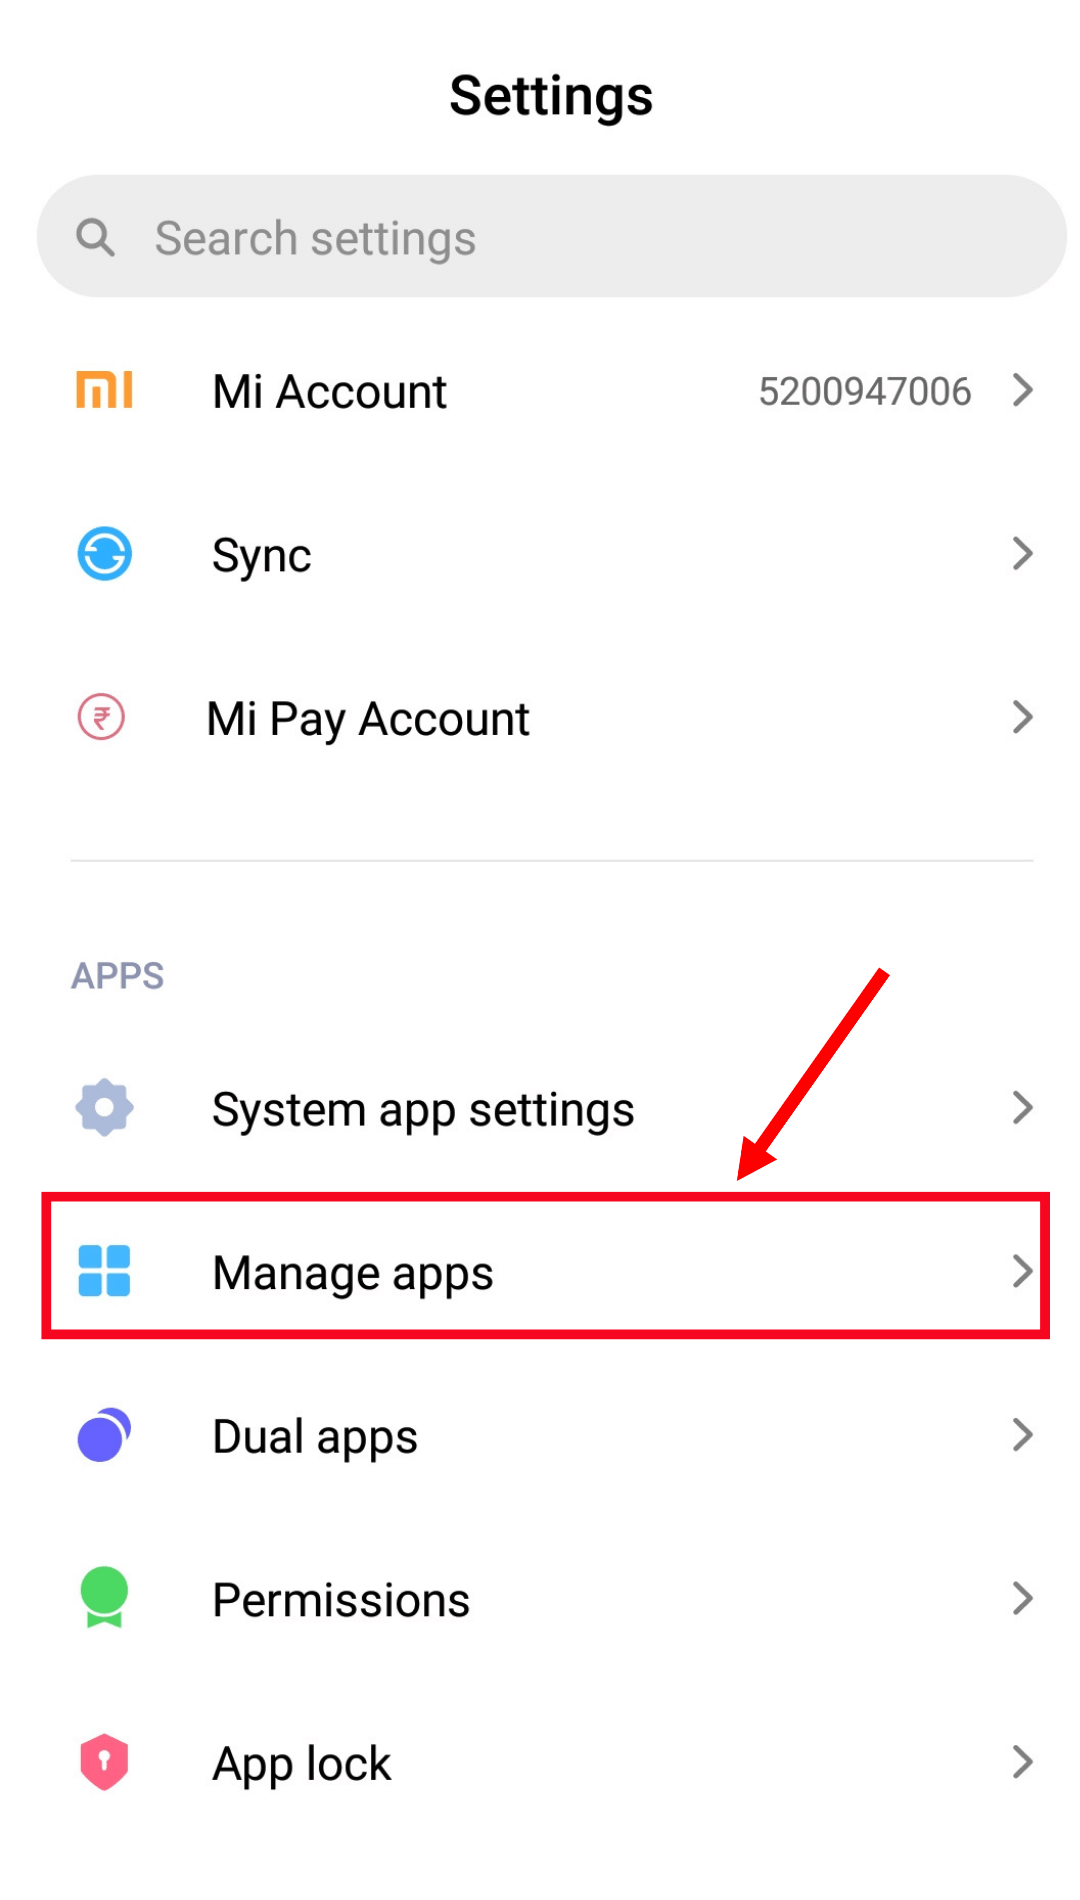 go to settings and select manage apps